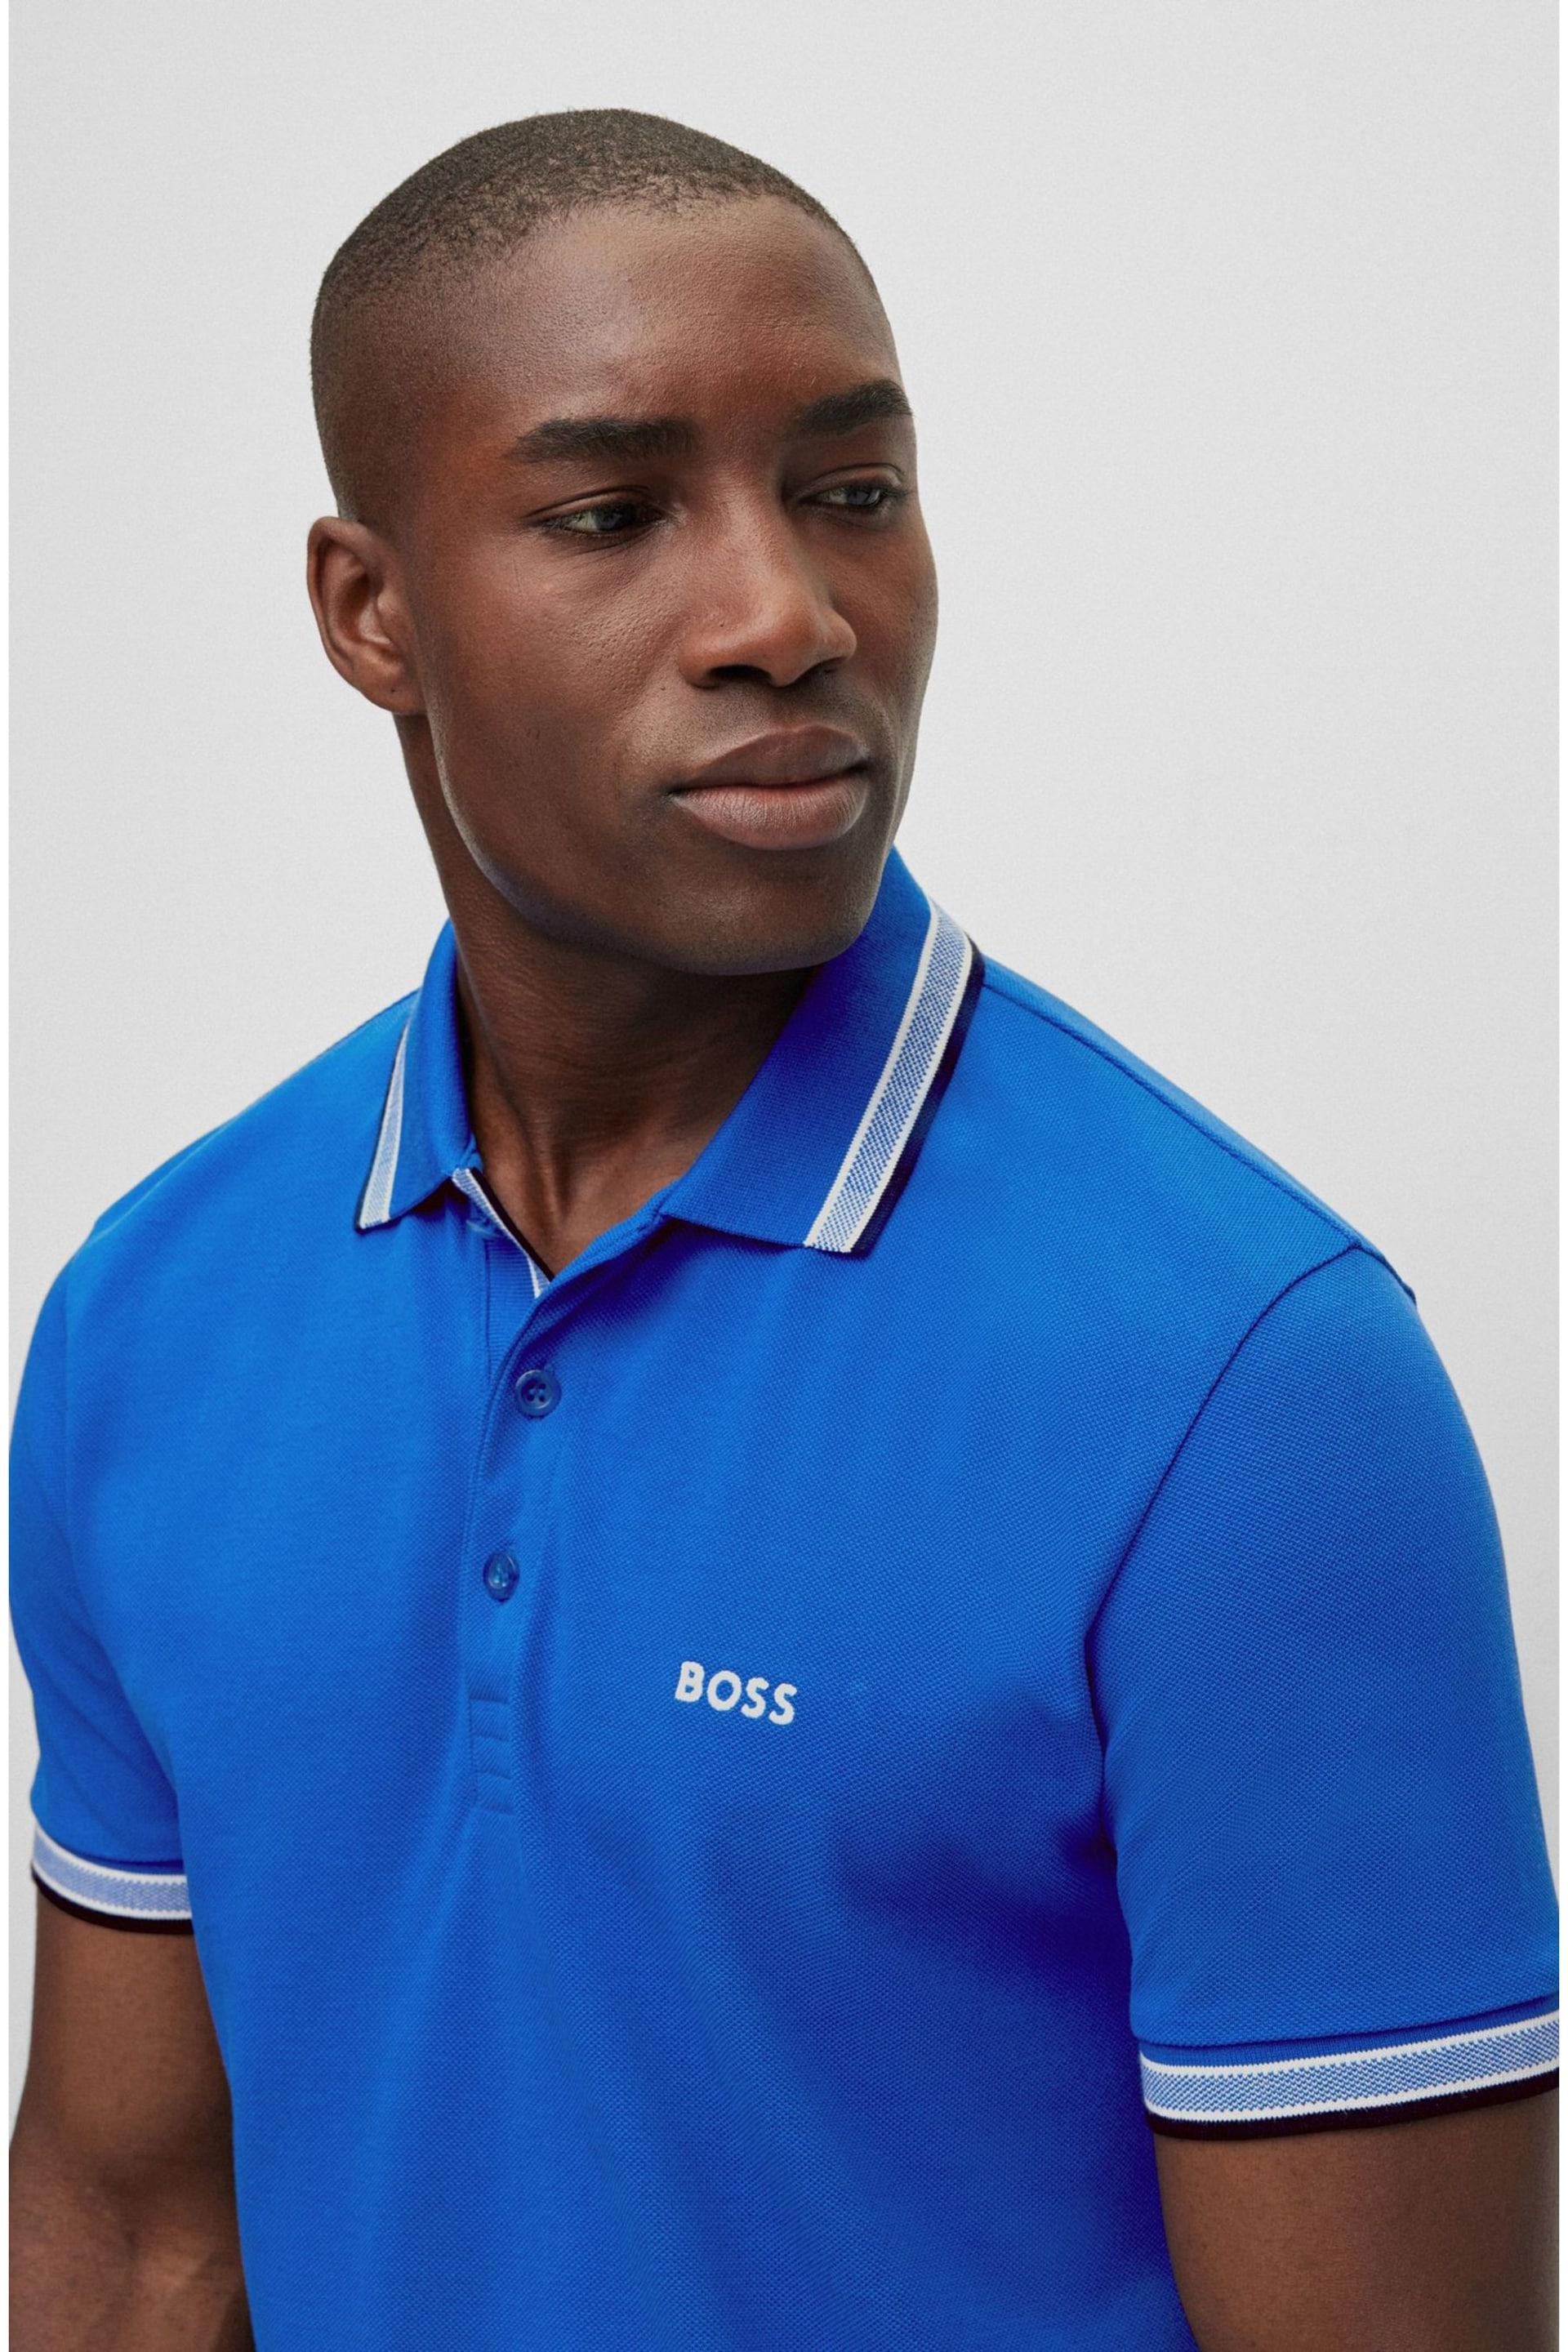 BOSS Bright Blue/Blue Tipping Paddy Polo Shirt - Image 4 of 5